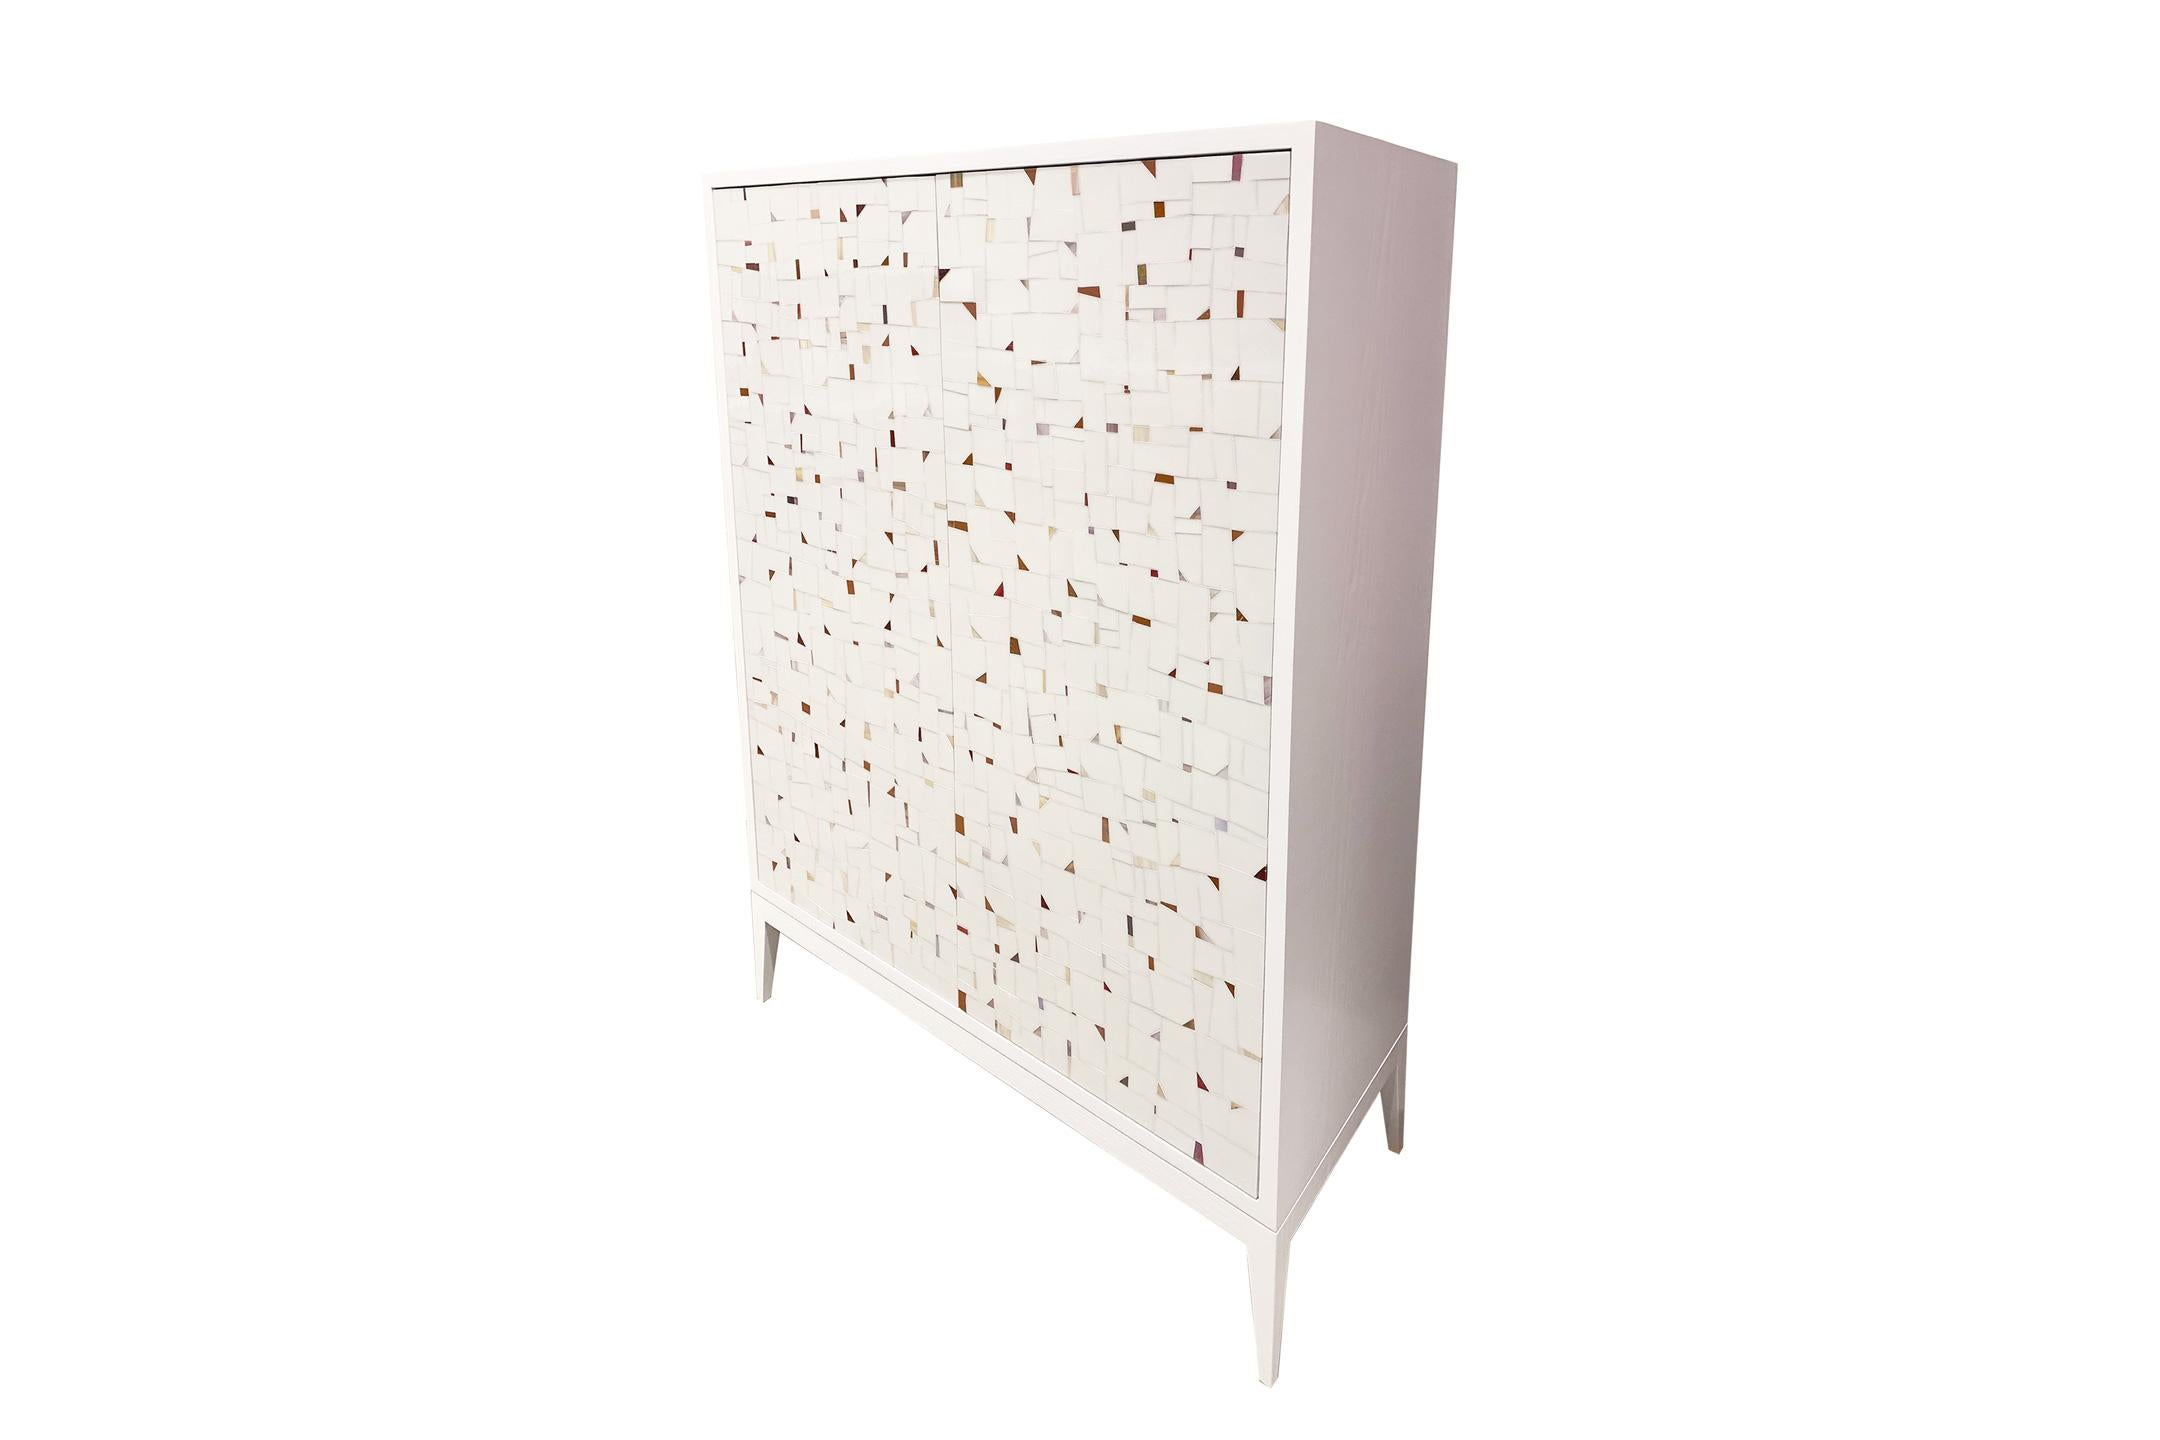 The Milano bar cabinet by Ercole Home has a 2-door front, with a Painted White wood finish on oak. Handcut glass mosaics in Light ivory/white glass mosaic decorate the surface in a continuous Terrazzo pattern.
Custom sizes and finishes are